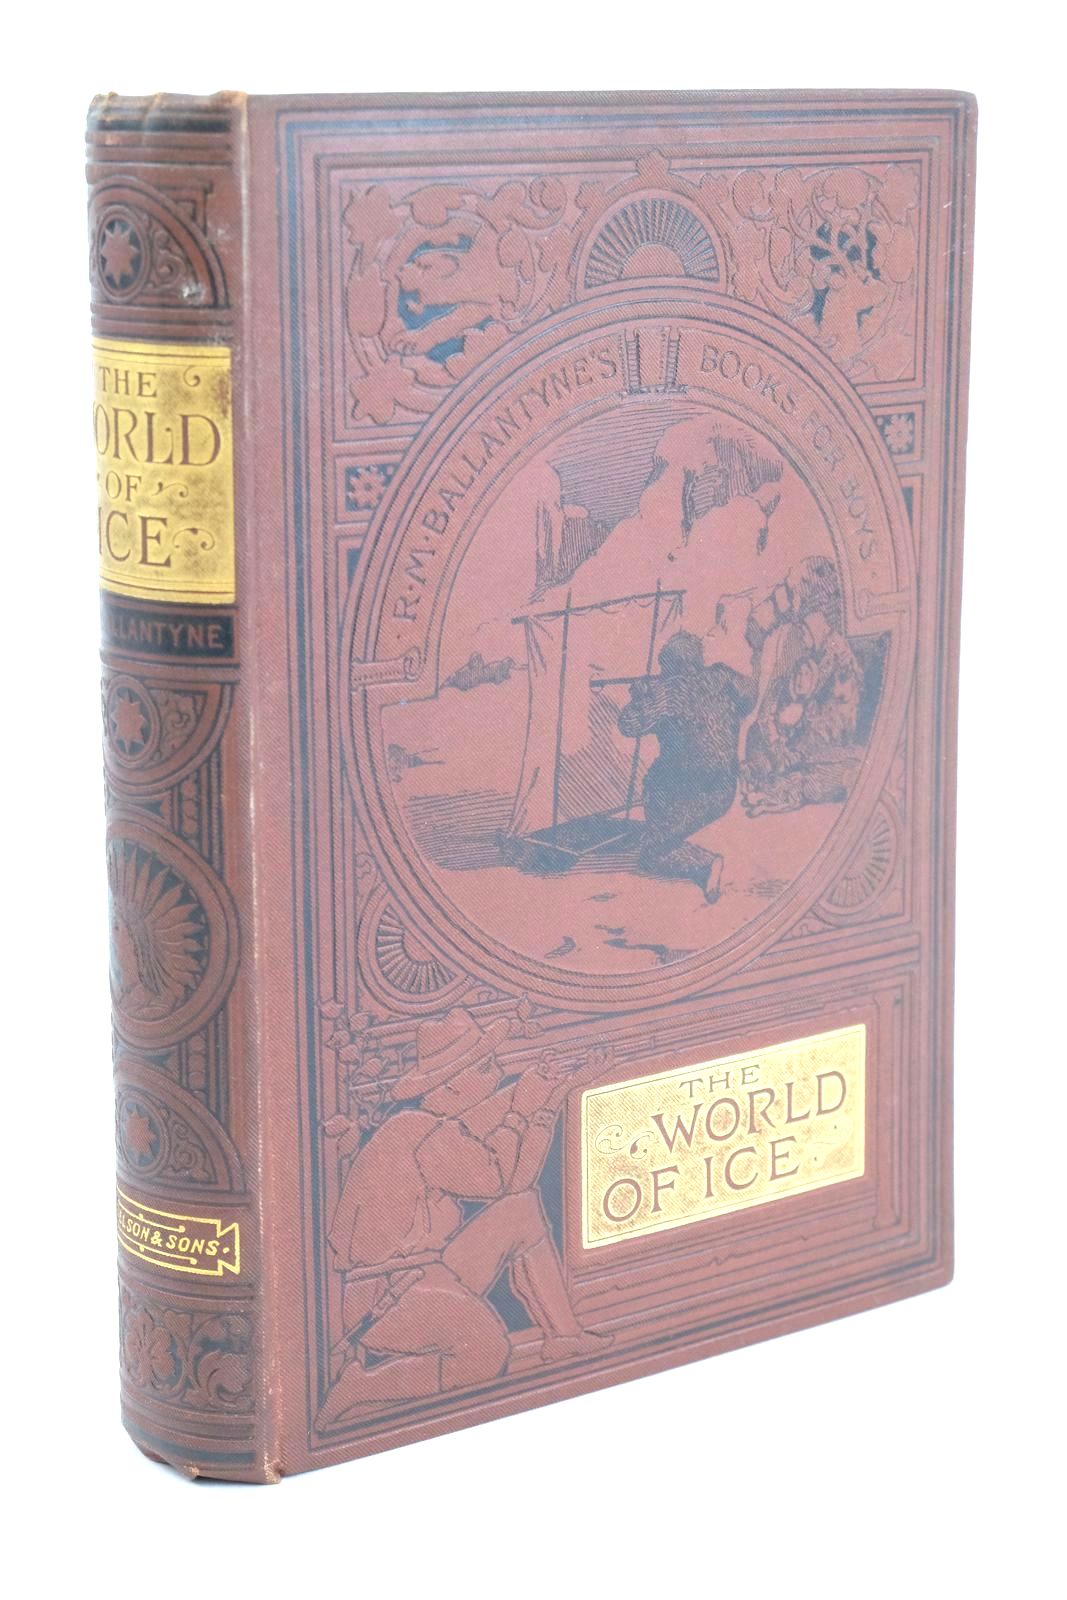 Photo of THE WORLD OF ICE written by Ballantyne, R.M. published by T. Nelson & Sons (STOCK CODE: 1324700)  for sale by Stella & Rose's Books